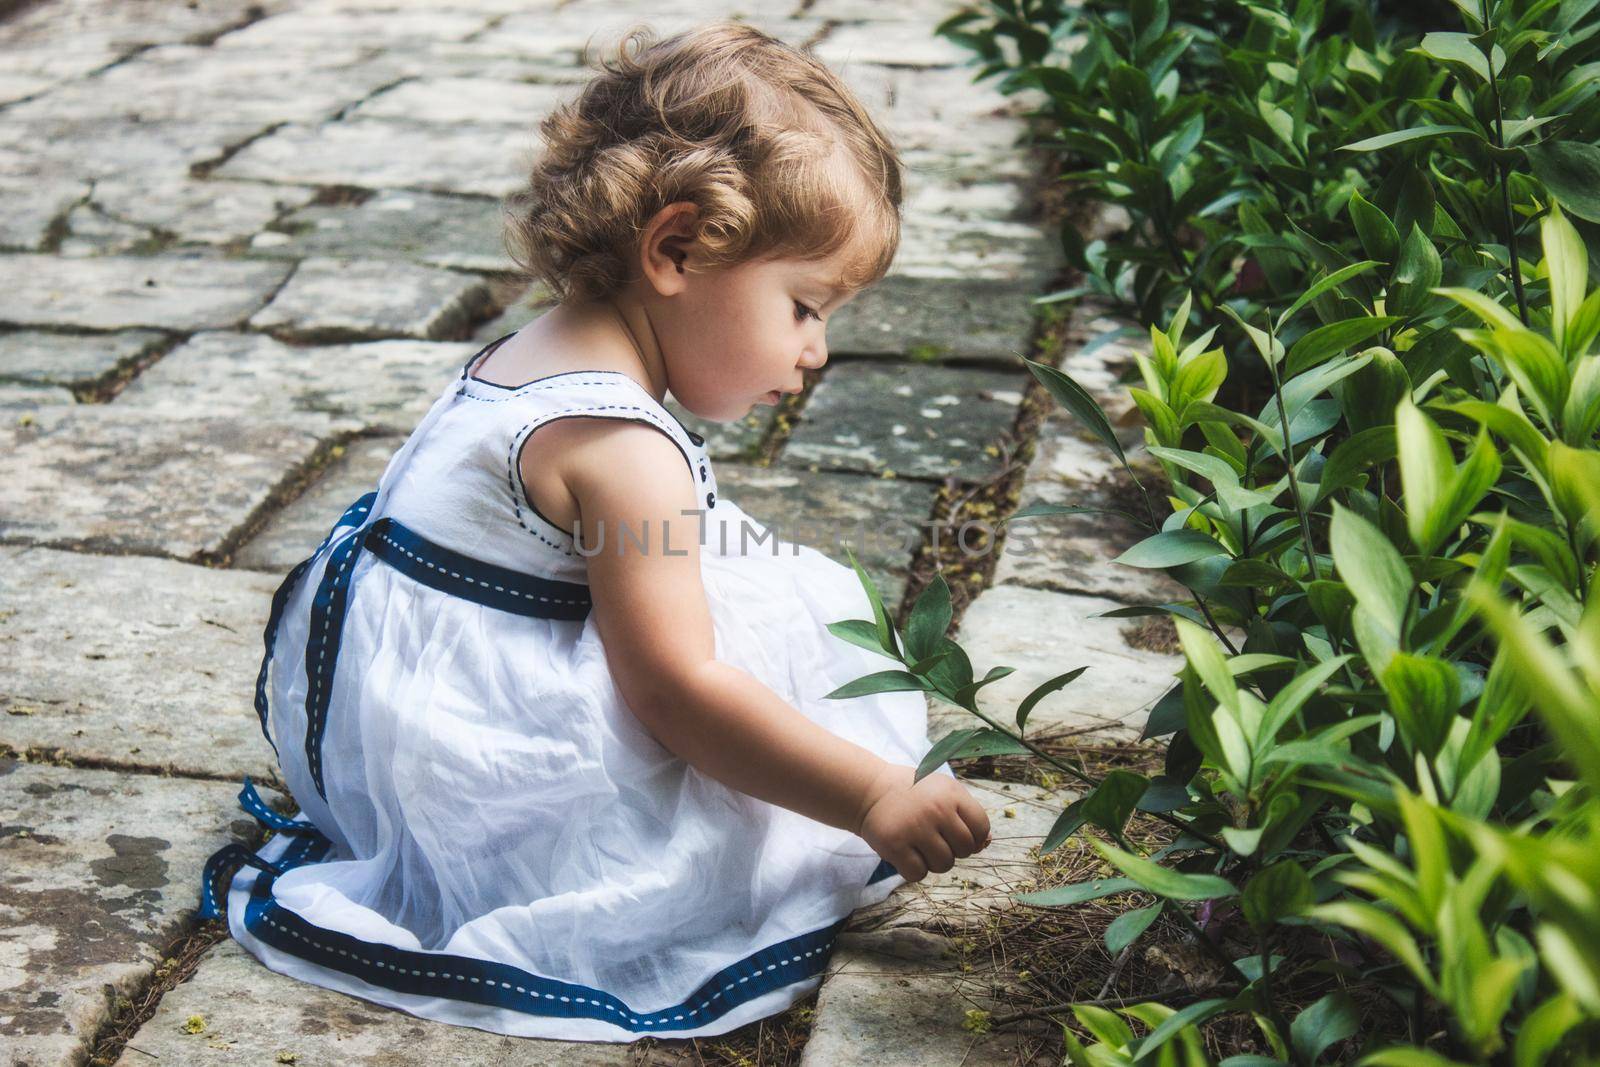 A beautiful cute young girl playing on a garden path with green leaf foliage